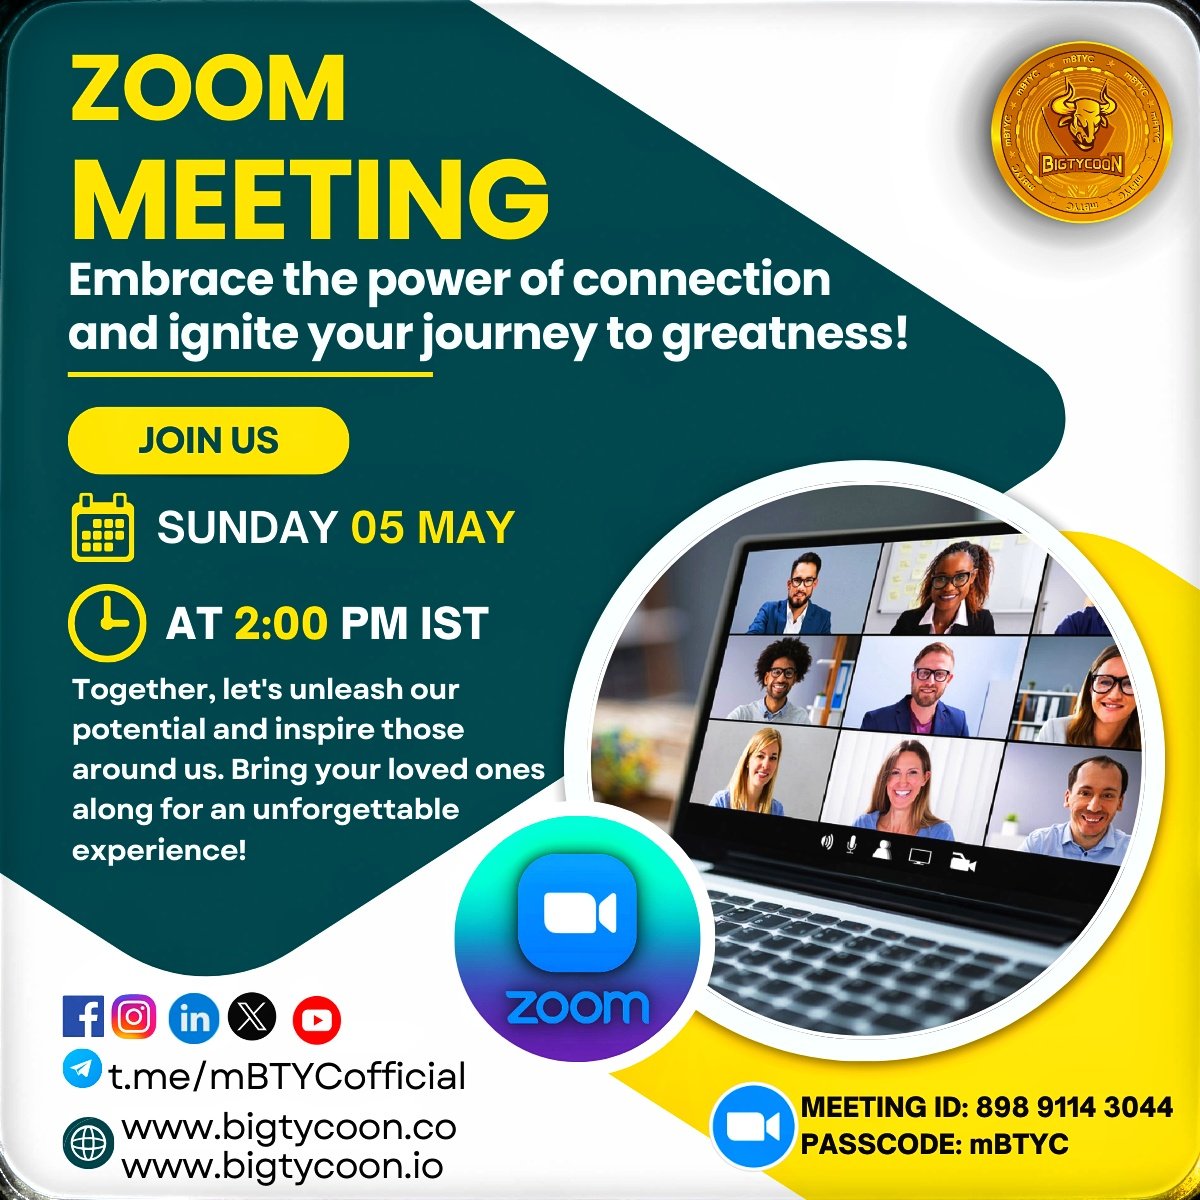 '🎉 Join us for the ultimate Zoom extravaganza this Sunday, May 5th, at 2pm IST! Get ready for an unforgettable virtual experience! 🚀 #ZoomParty #SundayFunday #แบมแบมอินราชมัง #LALISA #HBDTrisha #UNIS_Philippine_Tour #UNIS #Israel #StarWars #StarWarsDay #crypto #bitcoin